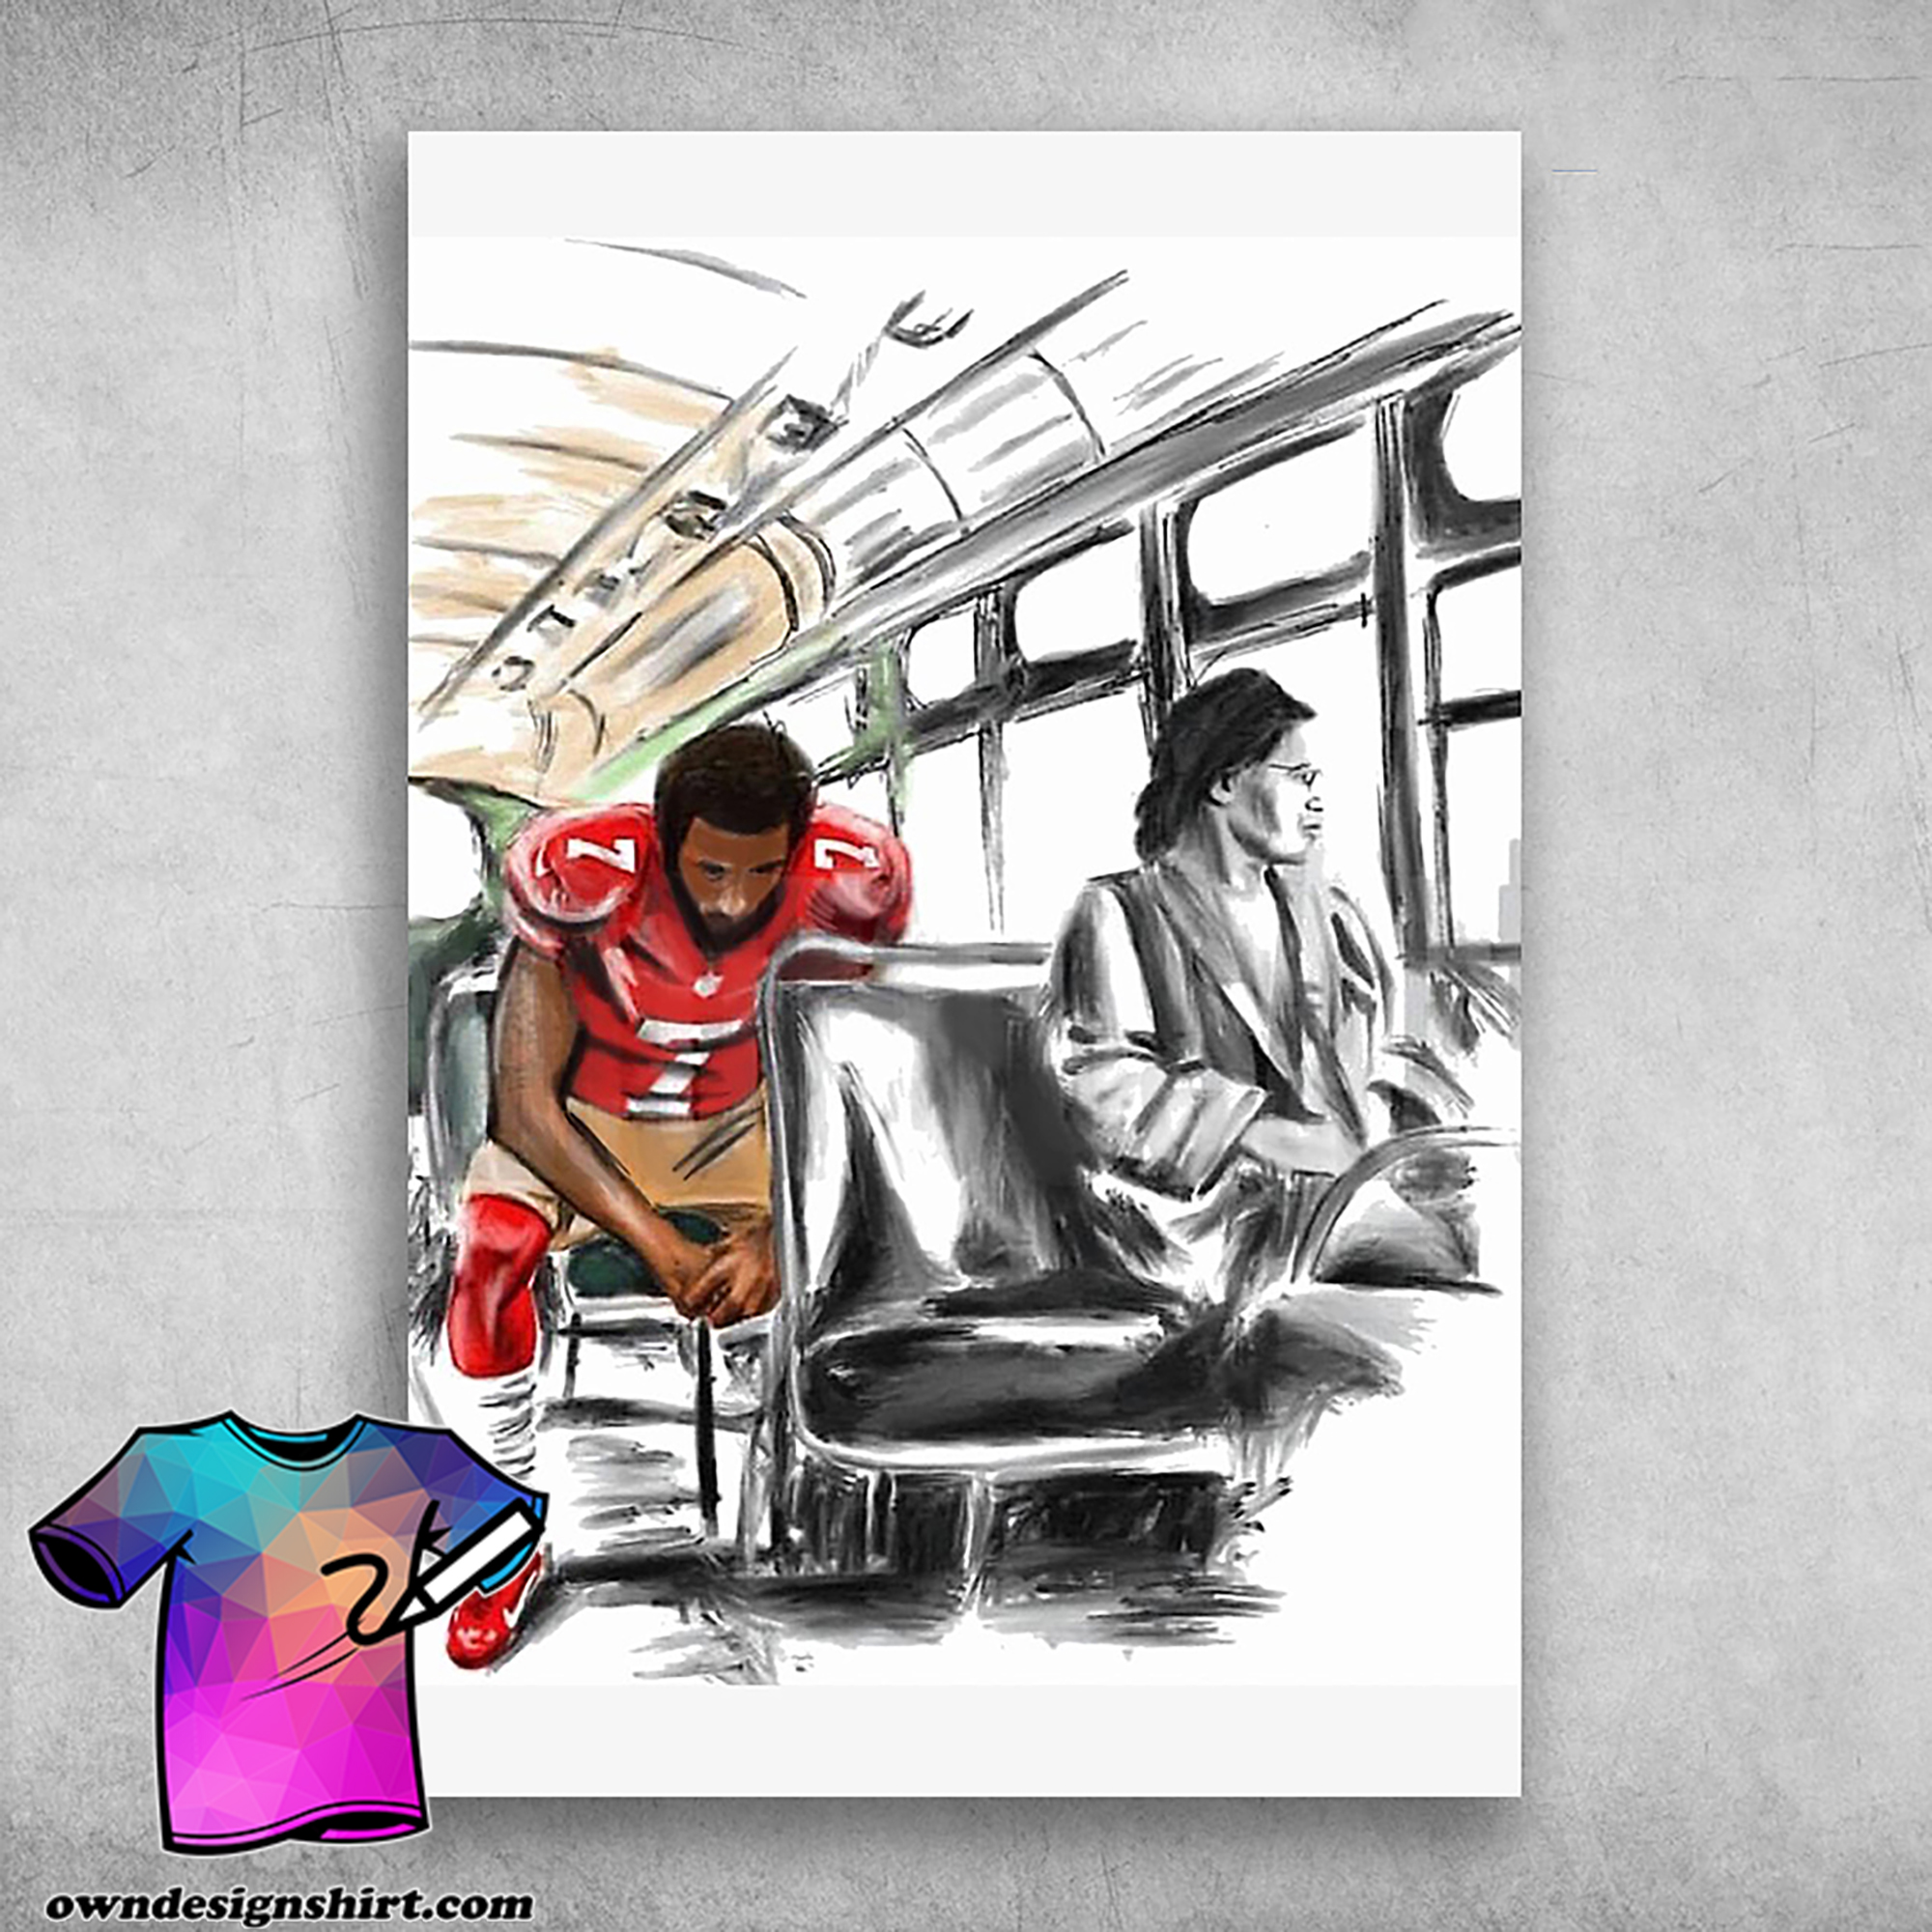 Rosa parks and colin kaepernick on the bus poster